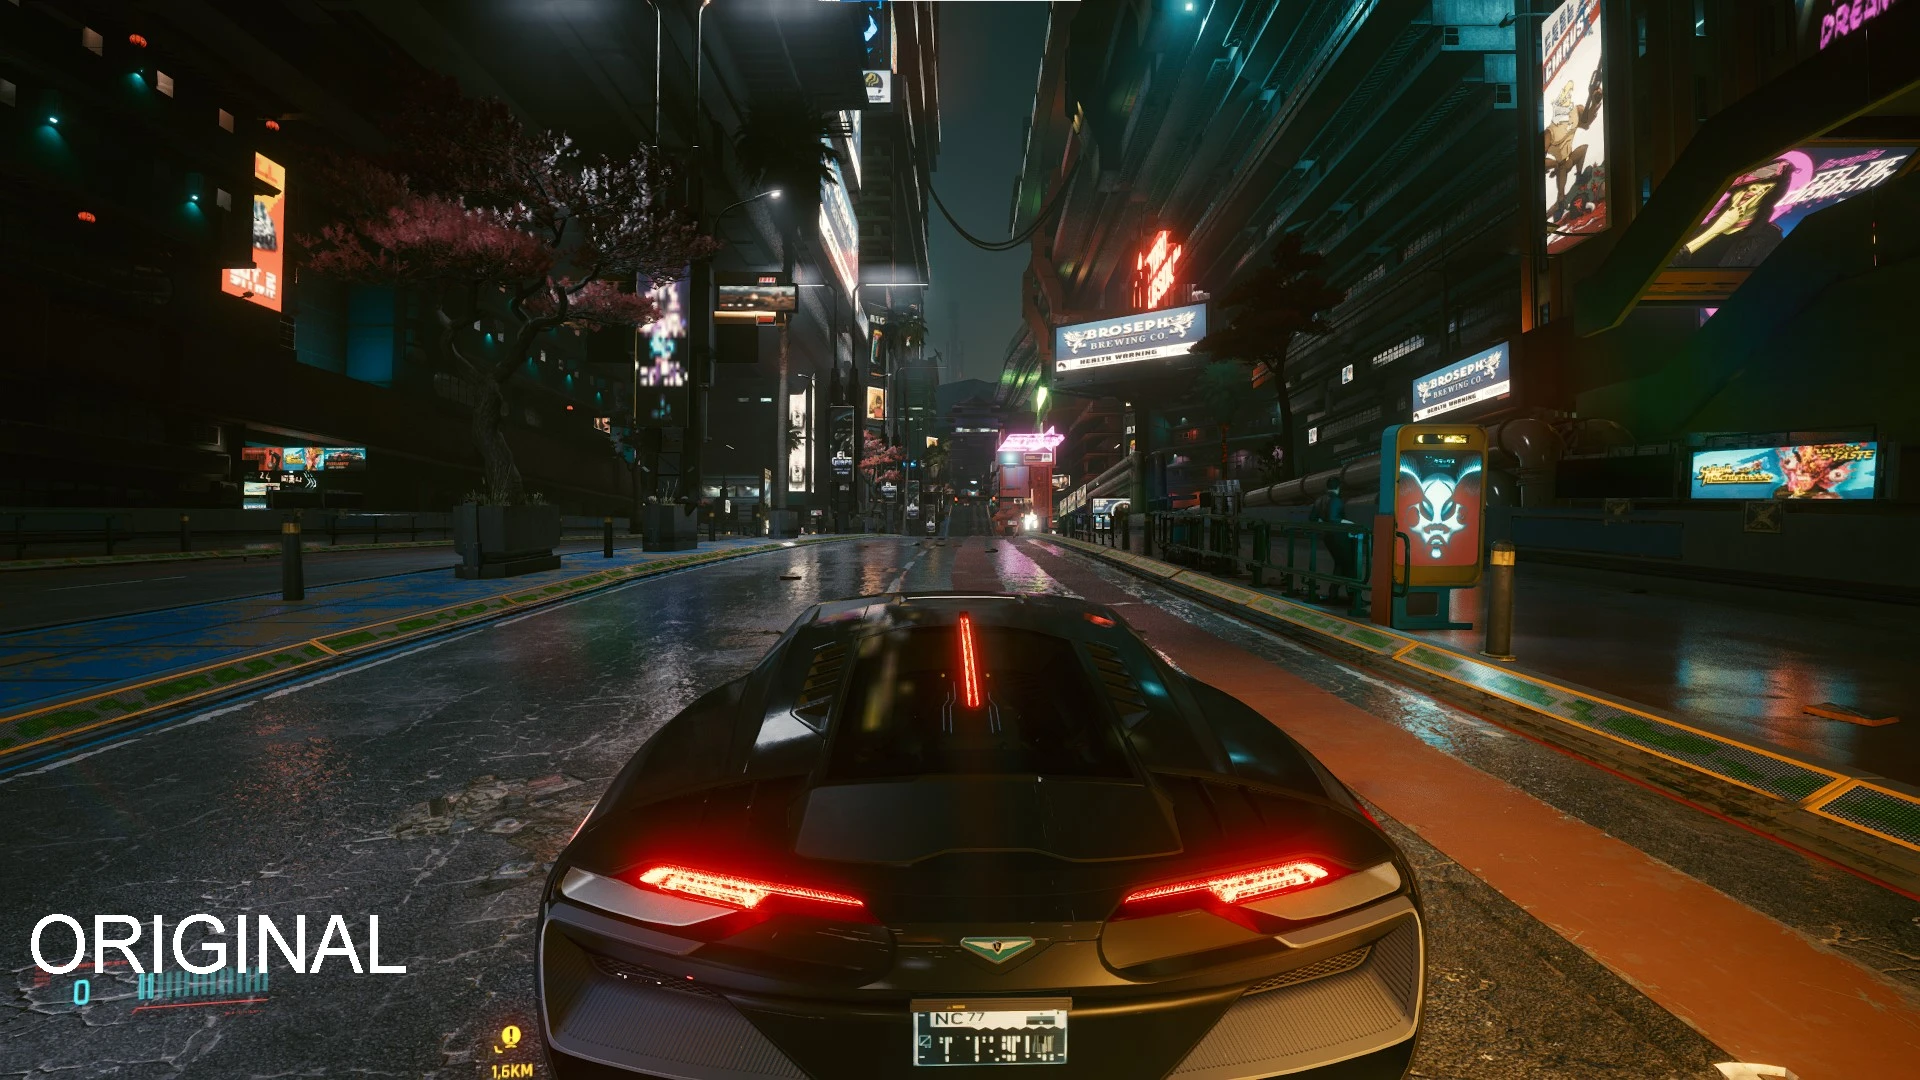 realistic reshade by Net_451 at Cyberpunk 2077 Nexus - Mods and community